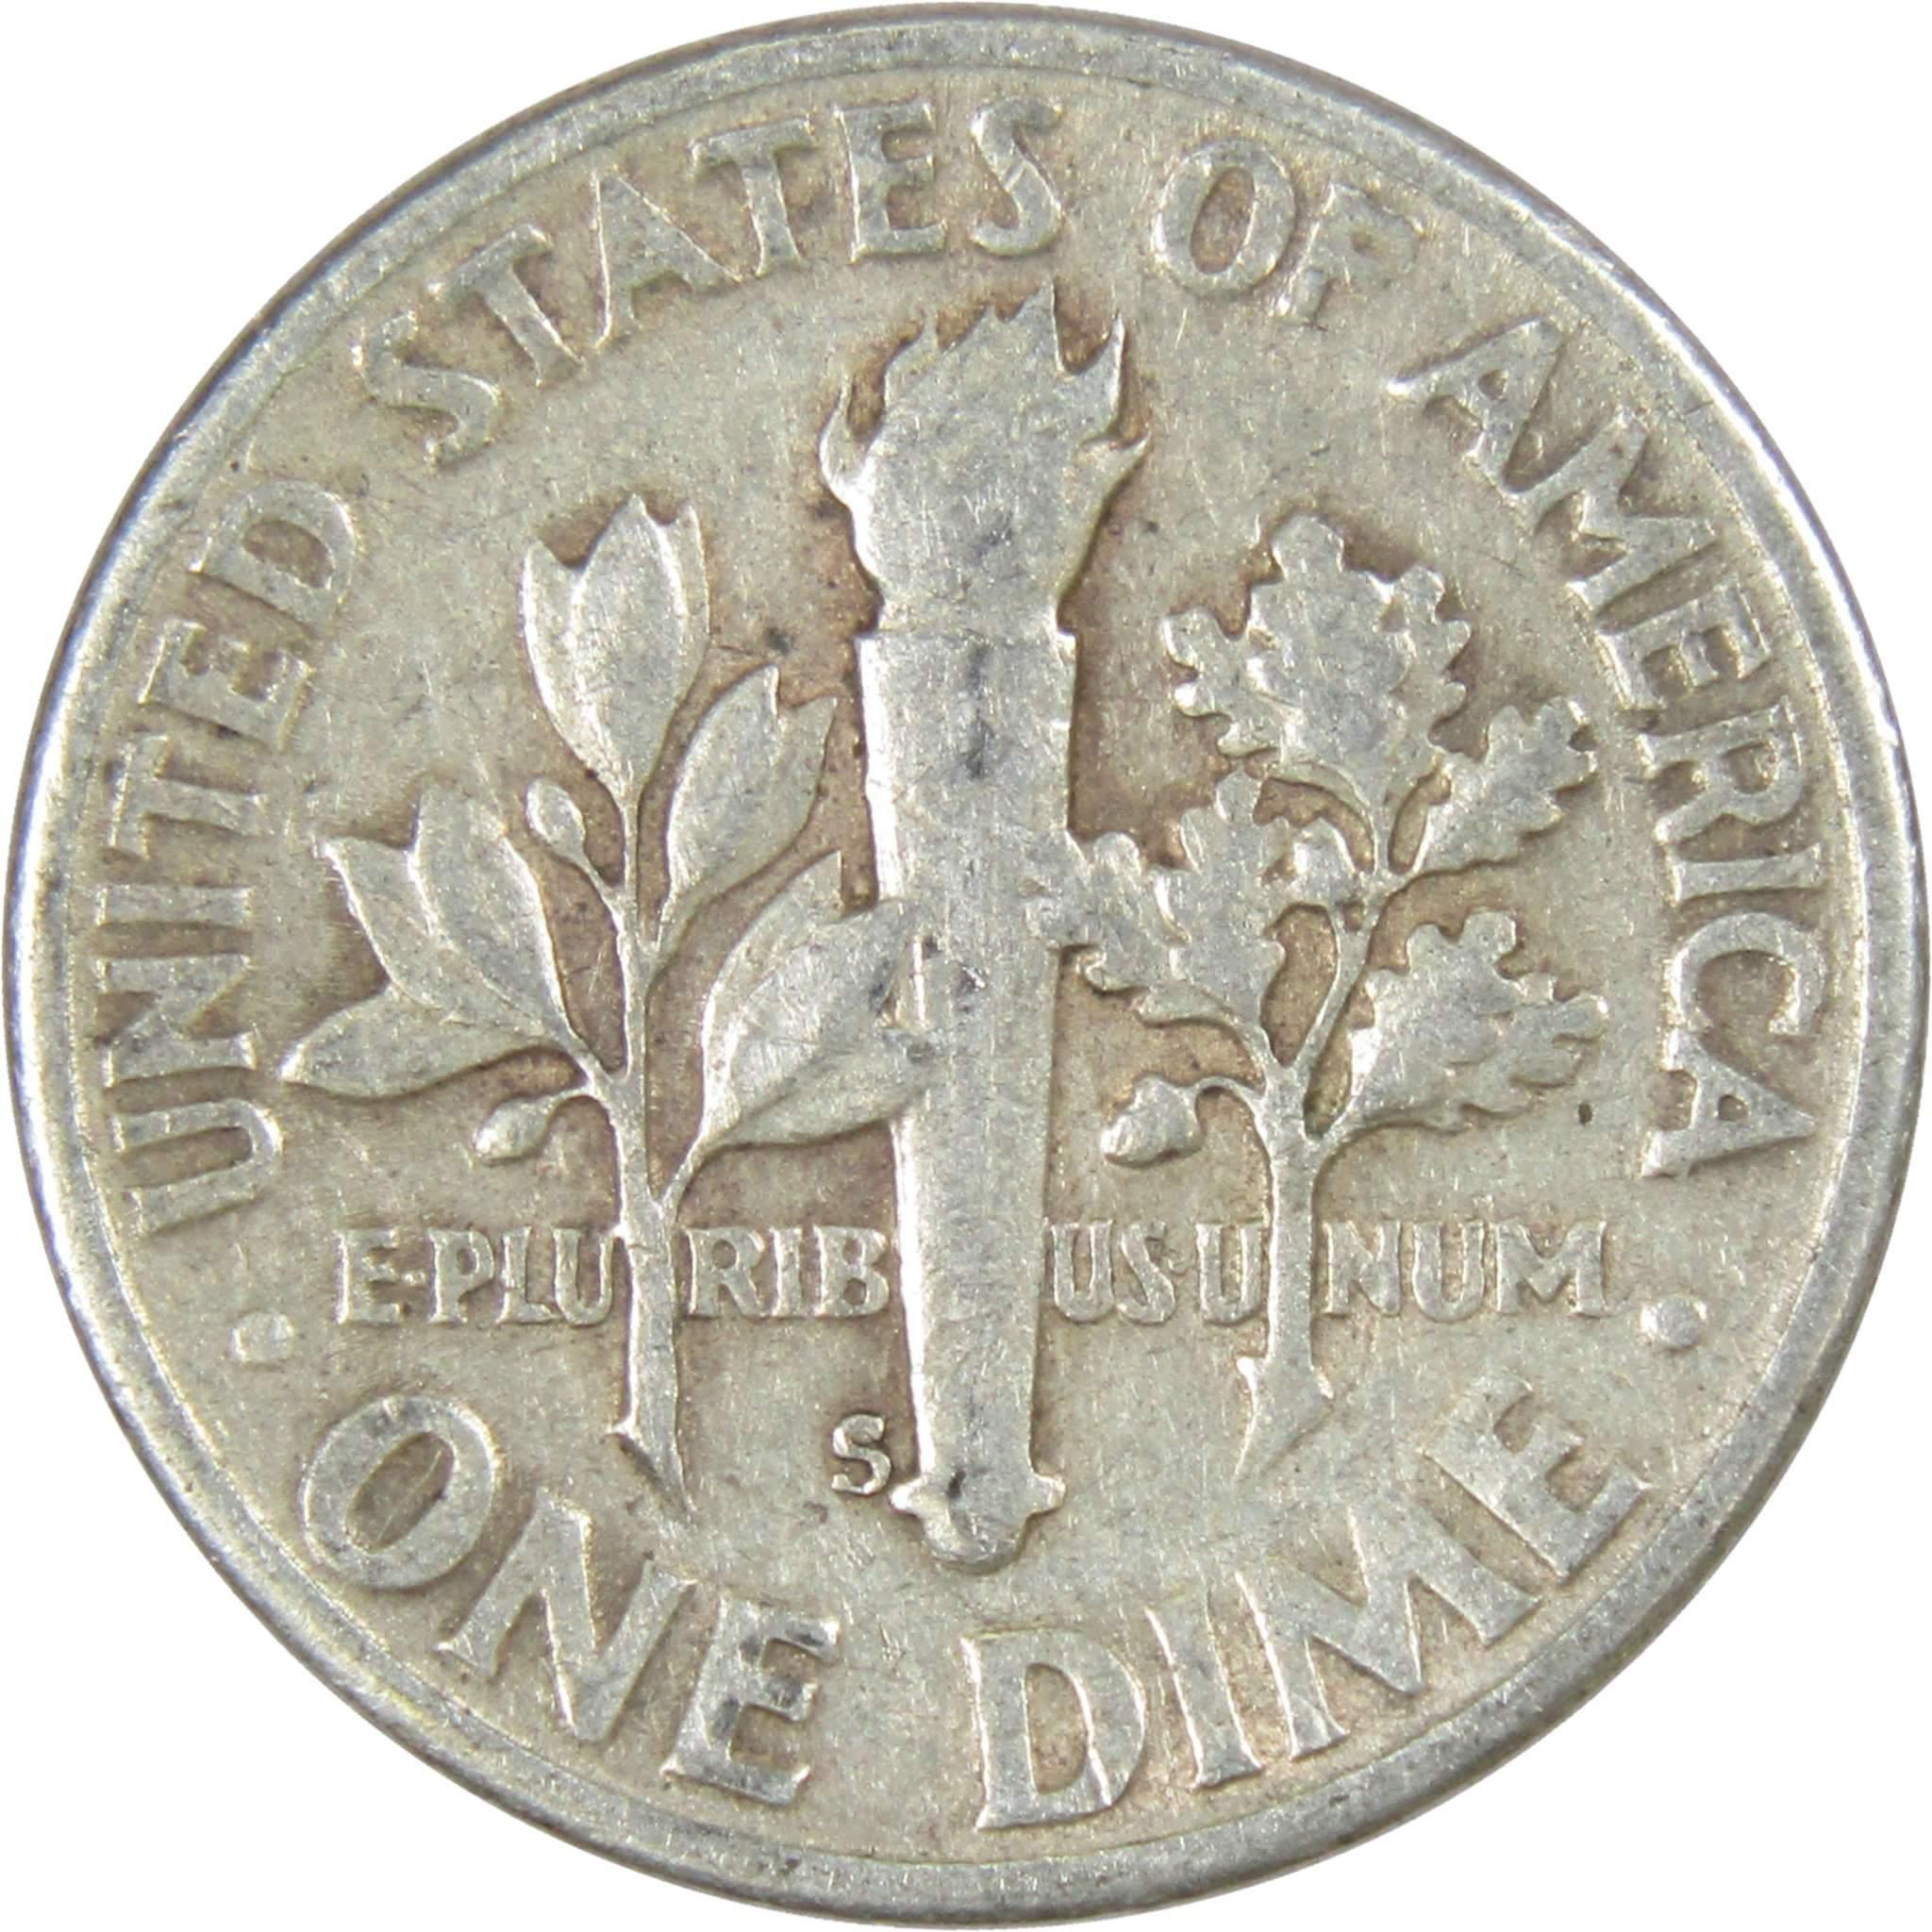 1953 S Roosevelt Dime AG About Good 90% Silver 10c US Coin Collectible